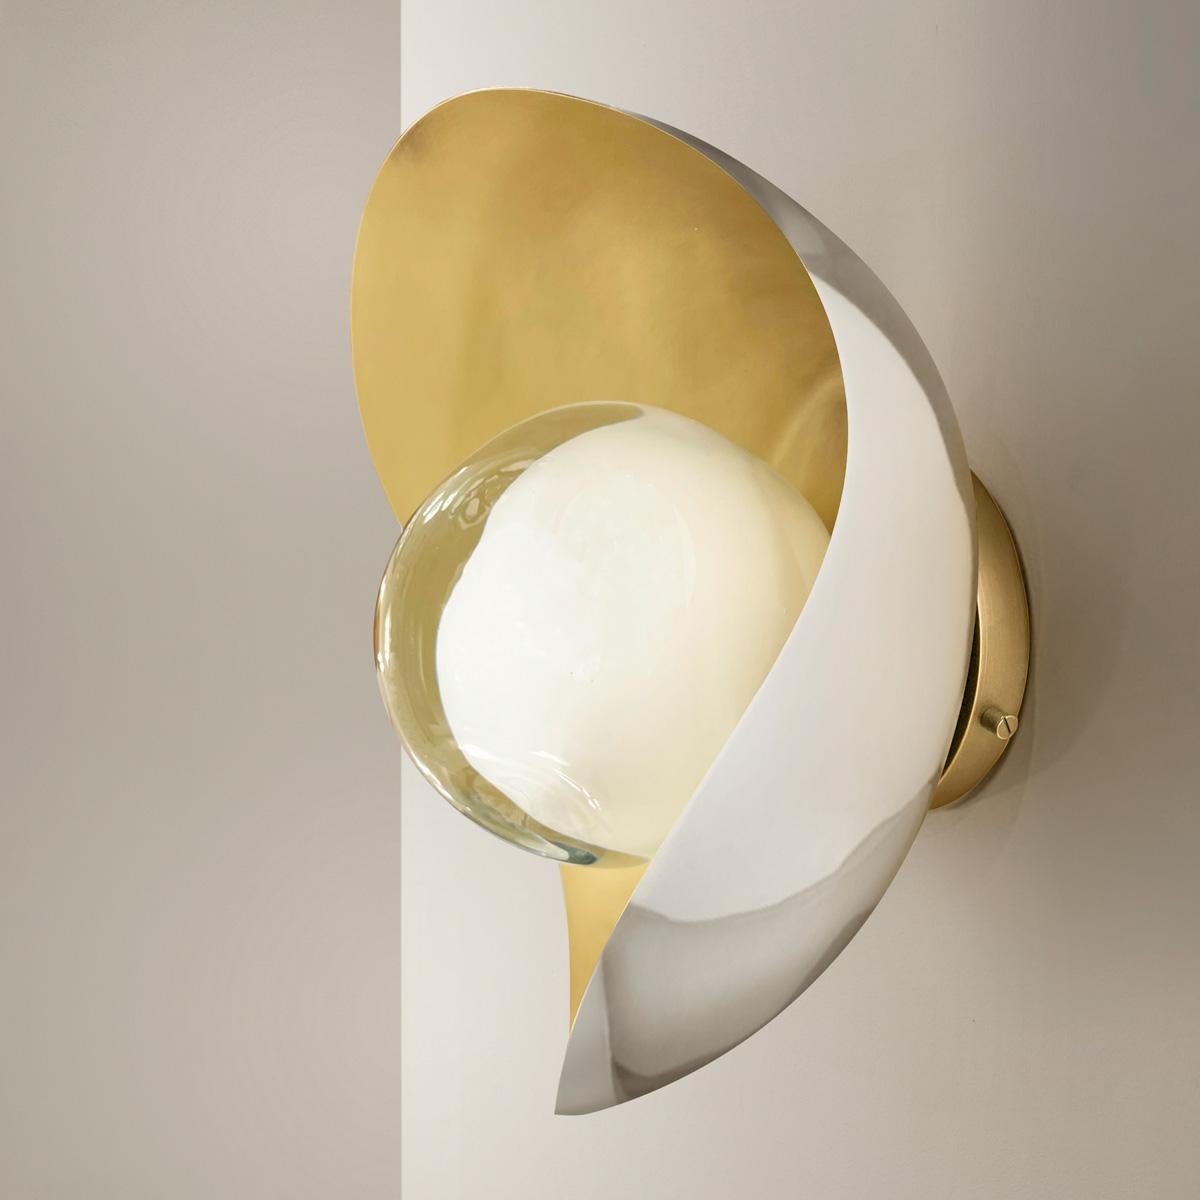 Contemporary Perla Wall Light by Gaspare Asaro-Polished Copper and Sand White Finish For Sale